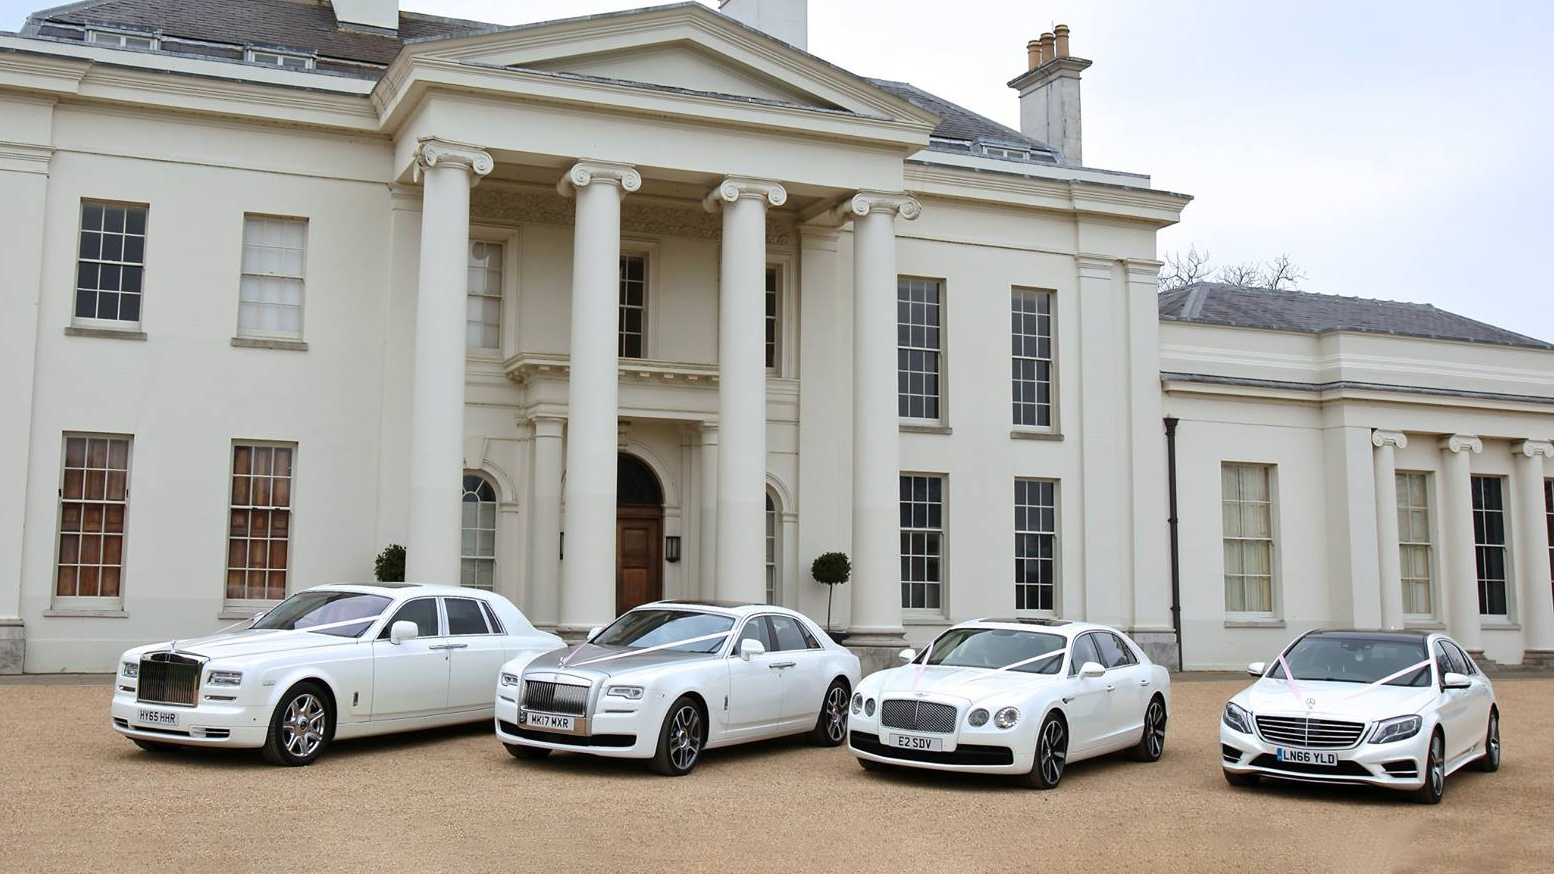 A selection of white Luxurious and modern vehicles all decorated with matching white ribbons on wedding duties in Stotfold. Frot Left to right: Rolls-Royce Phantom, Rolls-Royce Gho